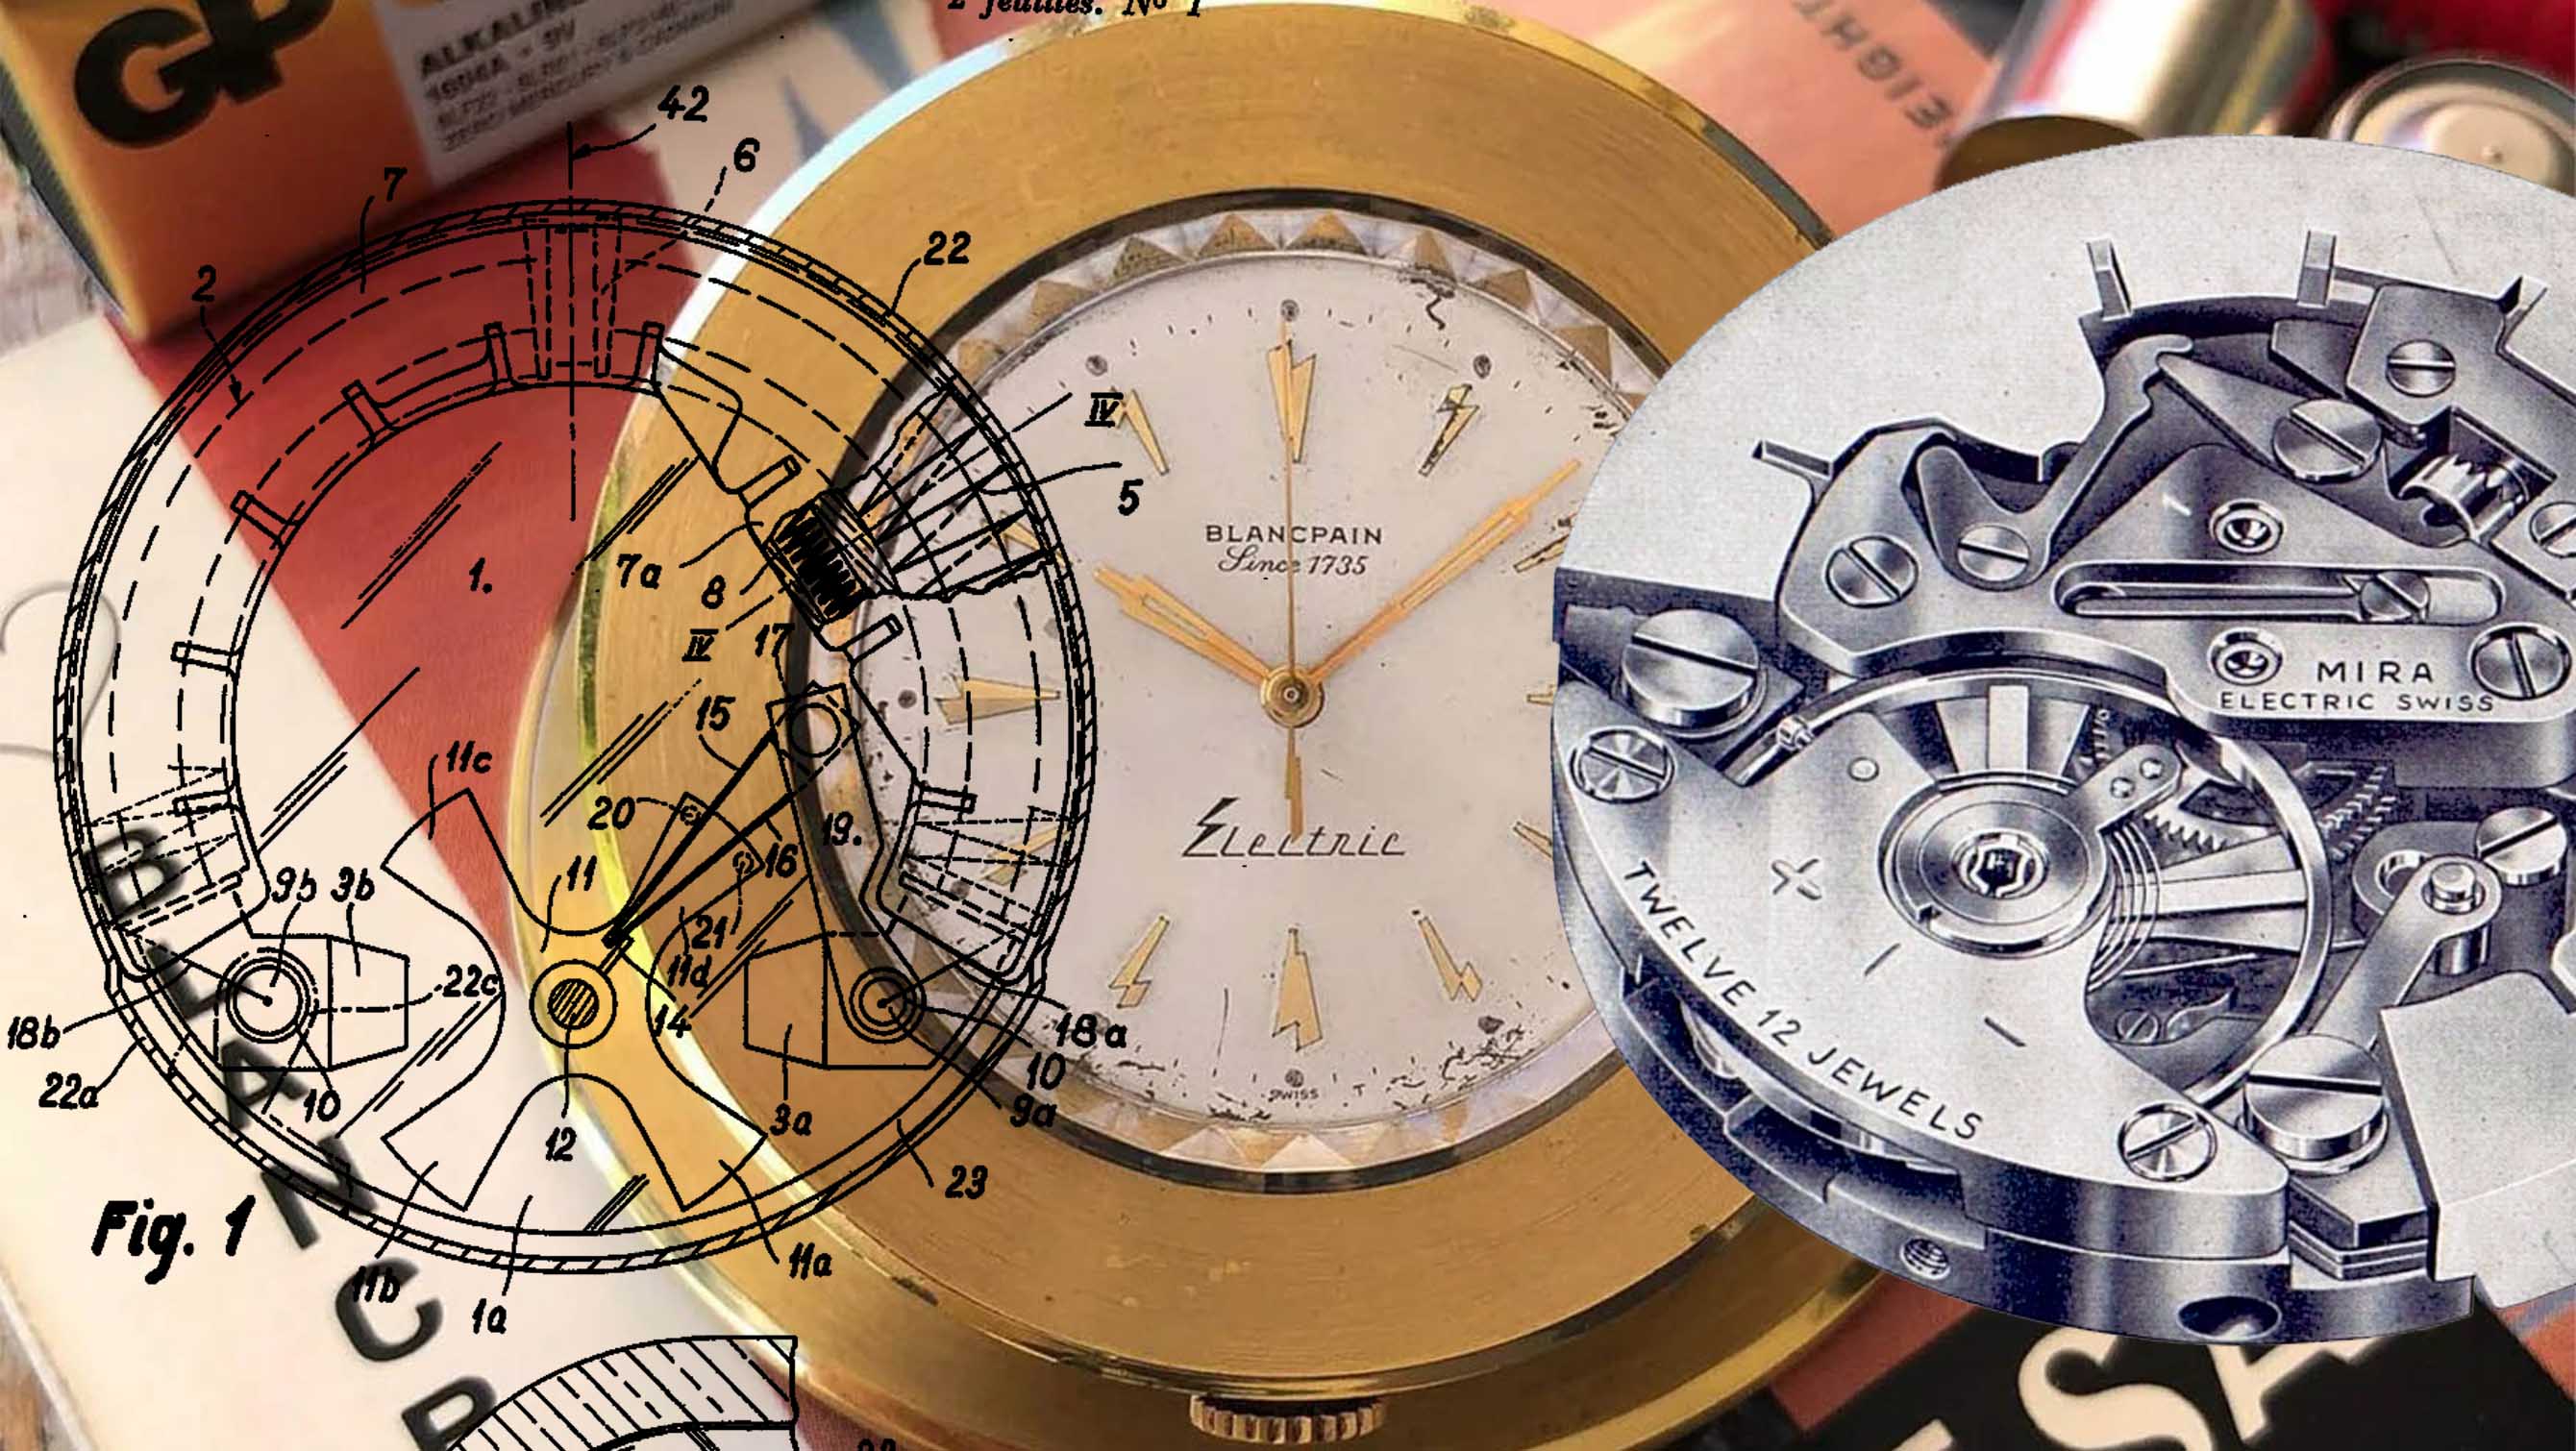 Did Blancpain break their promise with this electric clock?